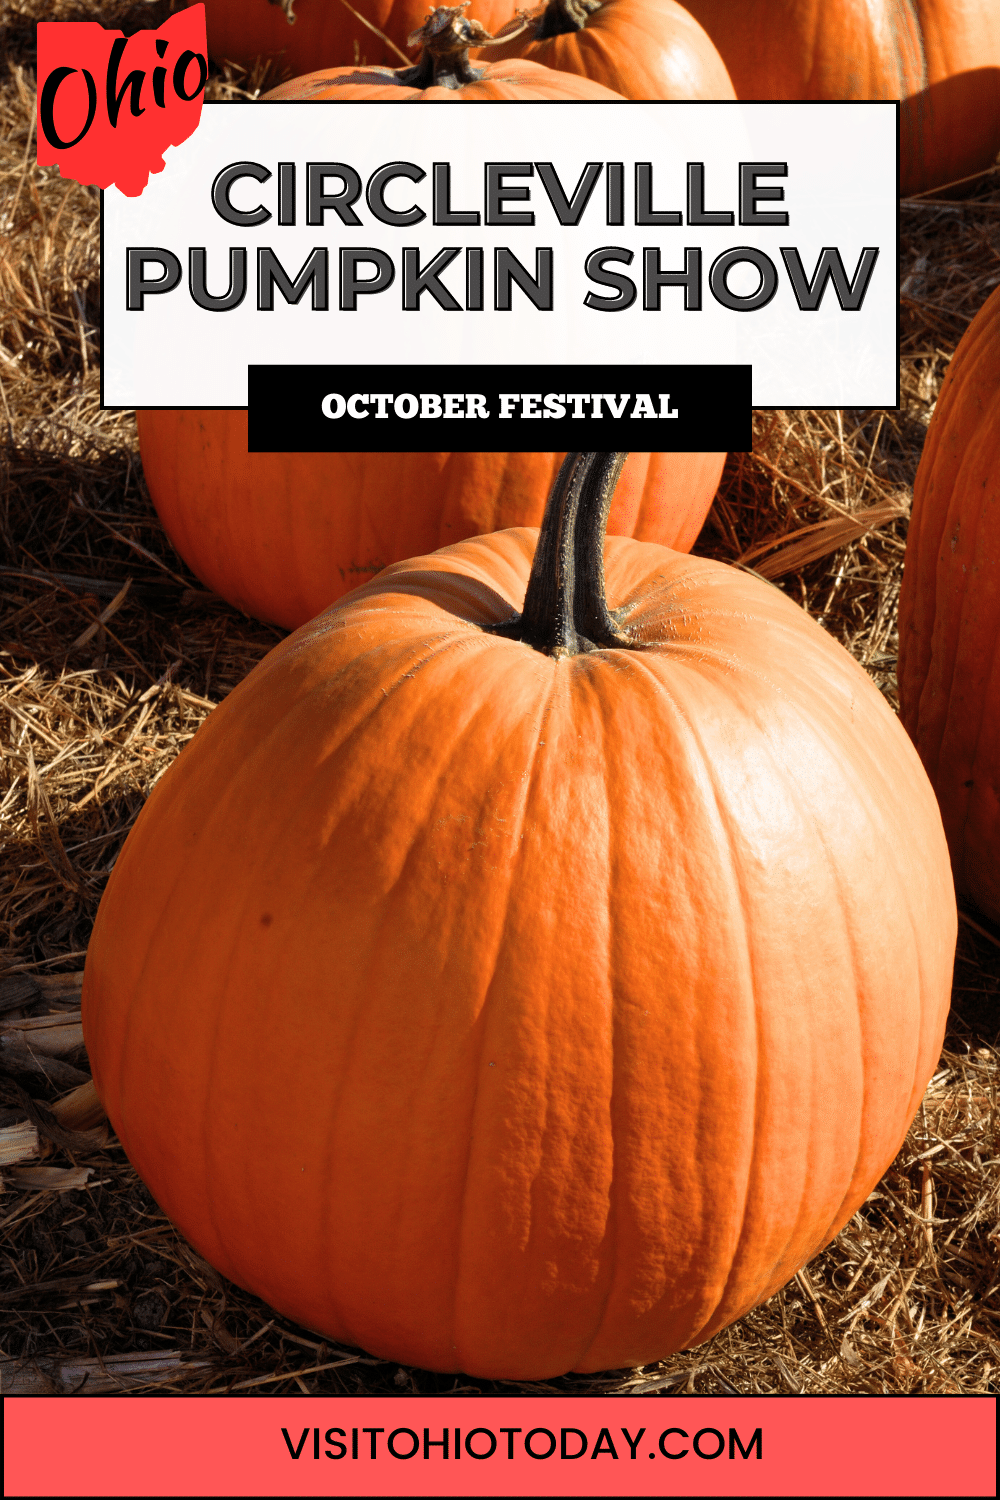 The Circleville Pumpkin show is a huge event that was originally created to bring country folks and city folks together. It now hosts more than 100,000 visitors on each of the four days of the show.